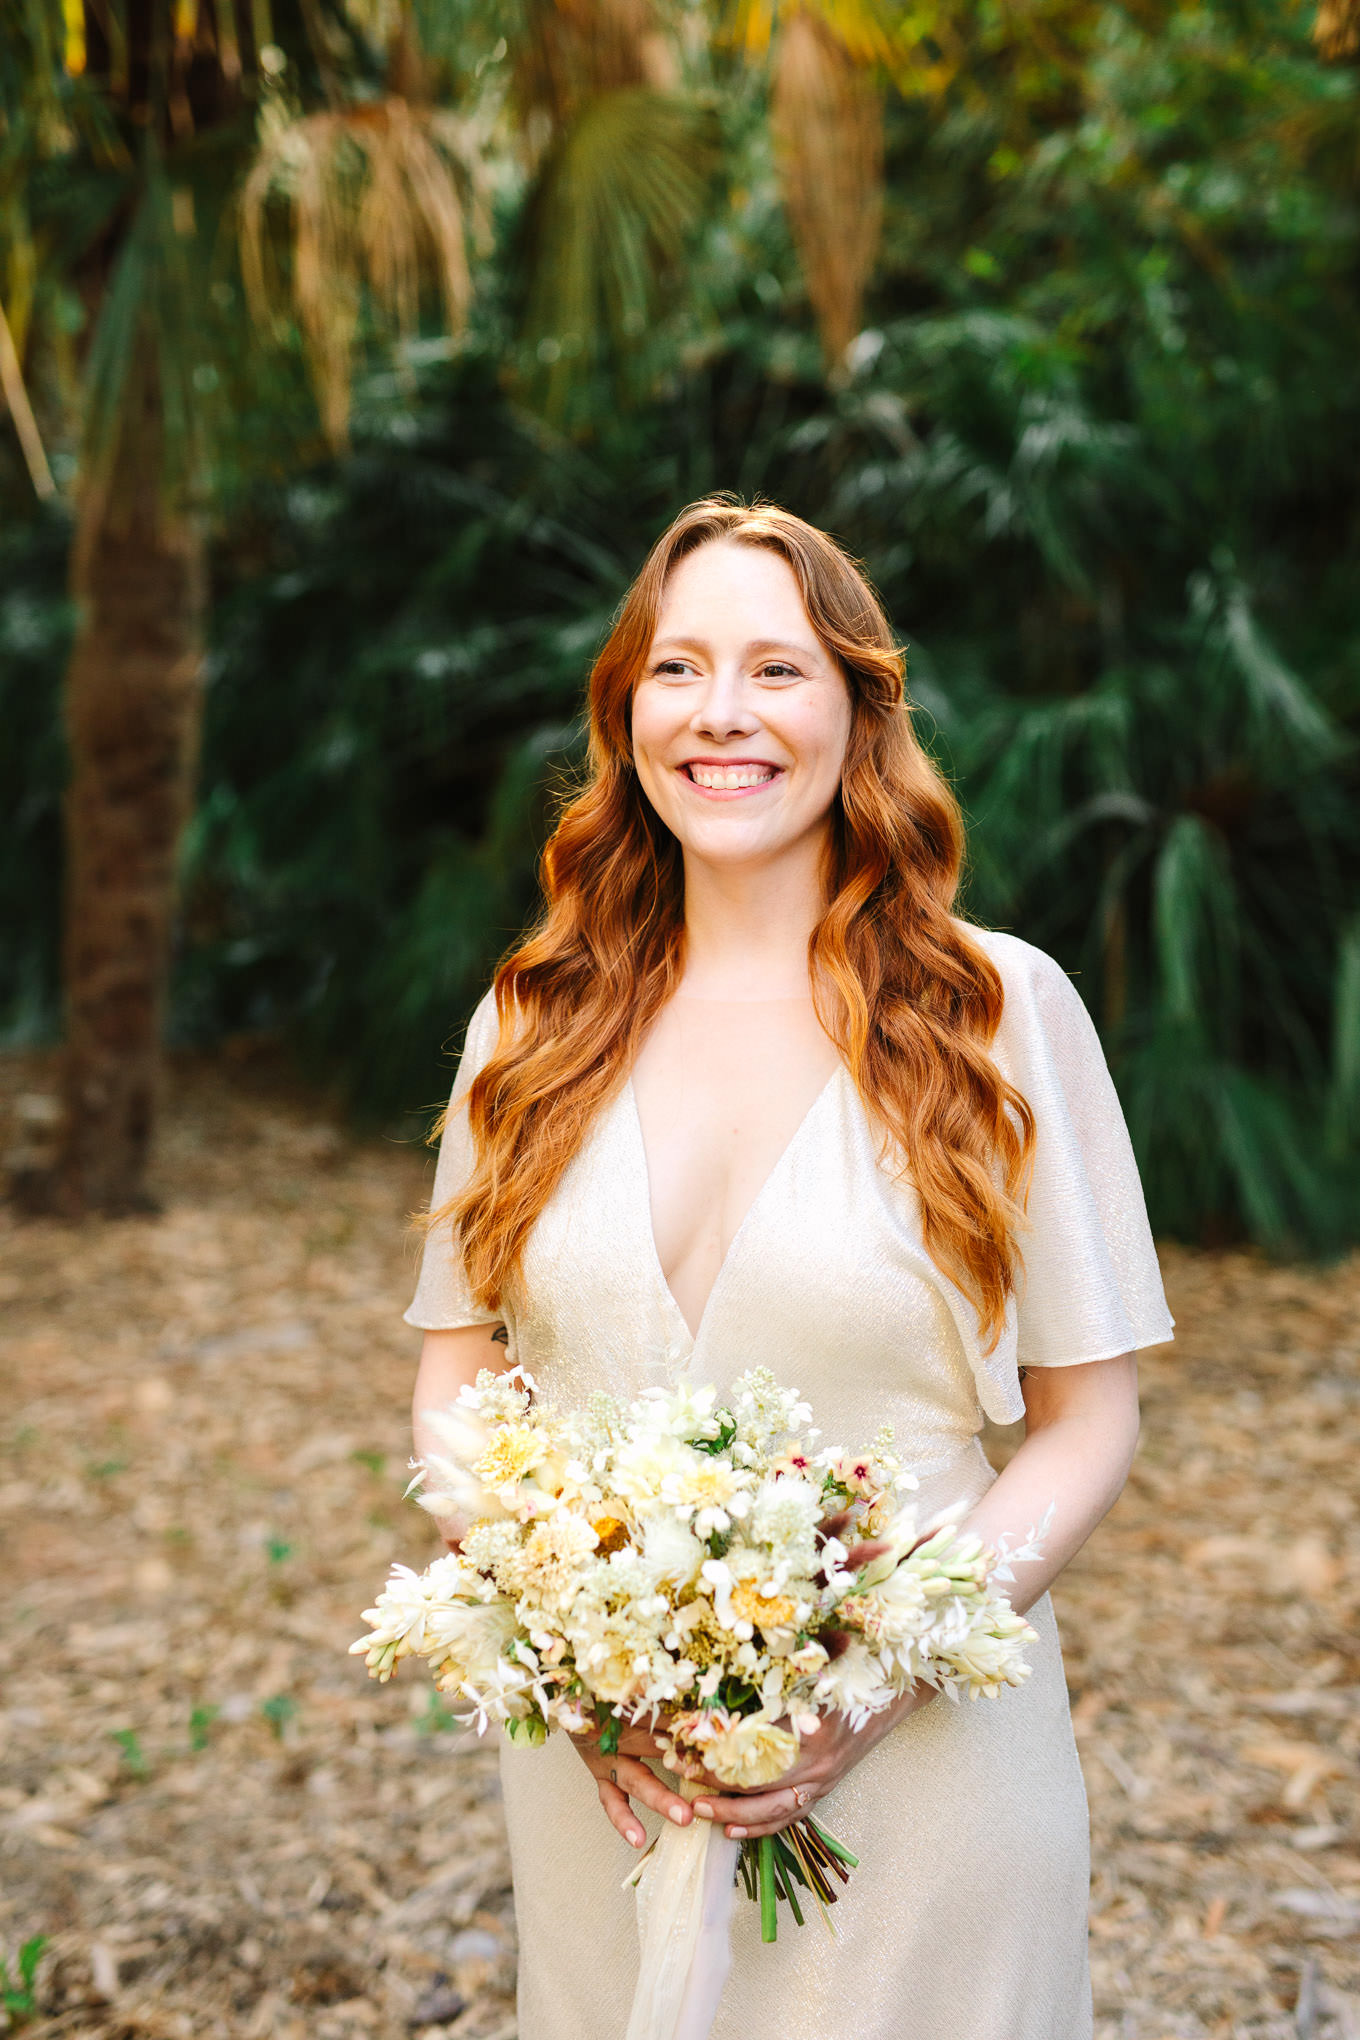 Bride with red wavy hair and boho bouquet laughing | Los Angeles Arboretum Elopement | Colorful and elevated wedding photography for fun-loving couples in Southern California | #LosAngelesElopement #elopement #LAarboretum #LAskyline #elopementphotos   Source: Mary Costa Photography | Los Angeles